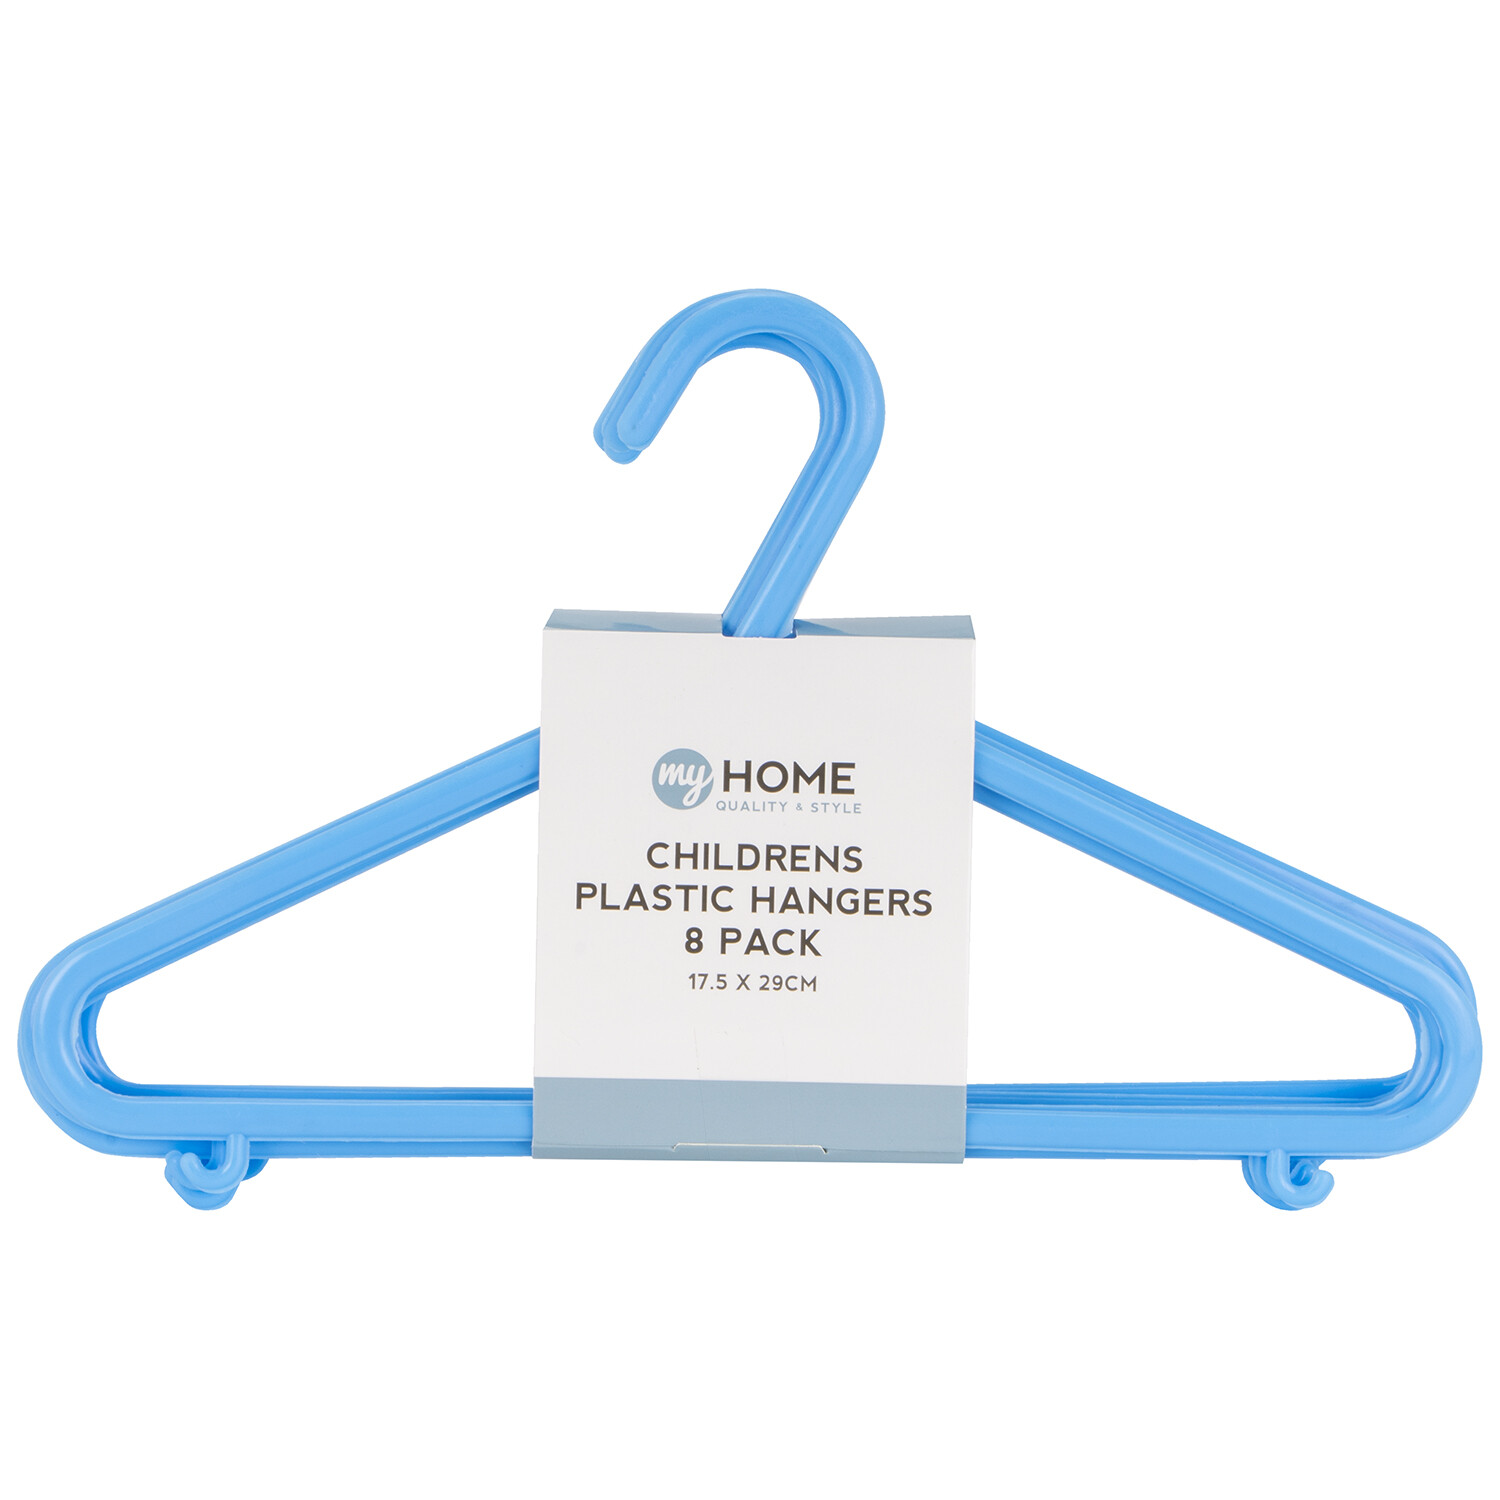 My Home Children's Plastic Clothes Hanger 8 Pack Image 1